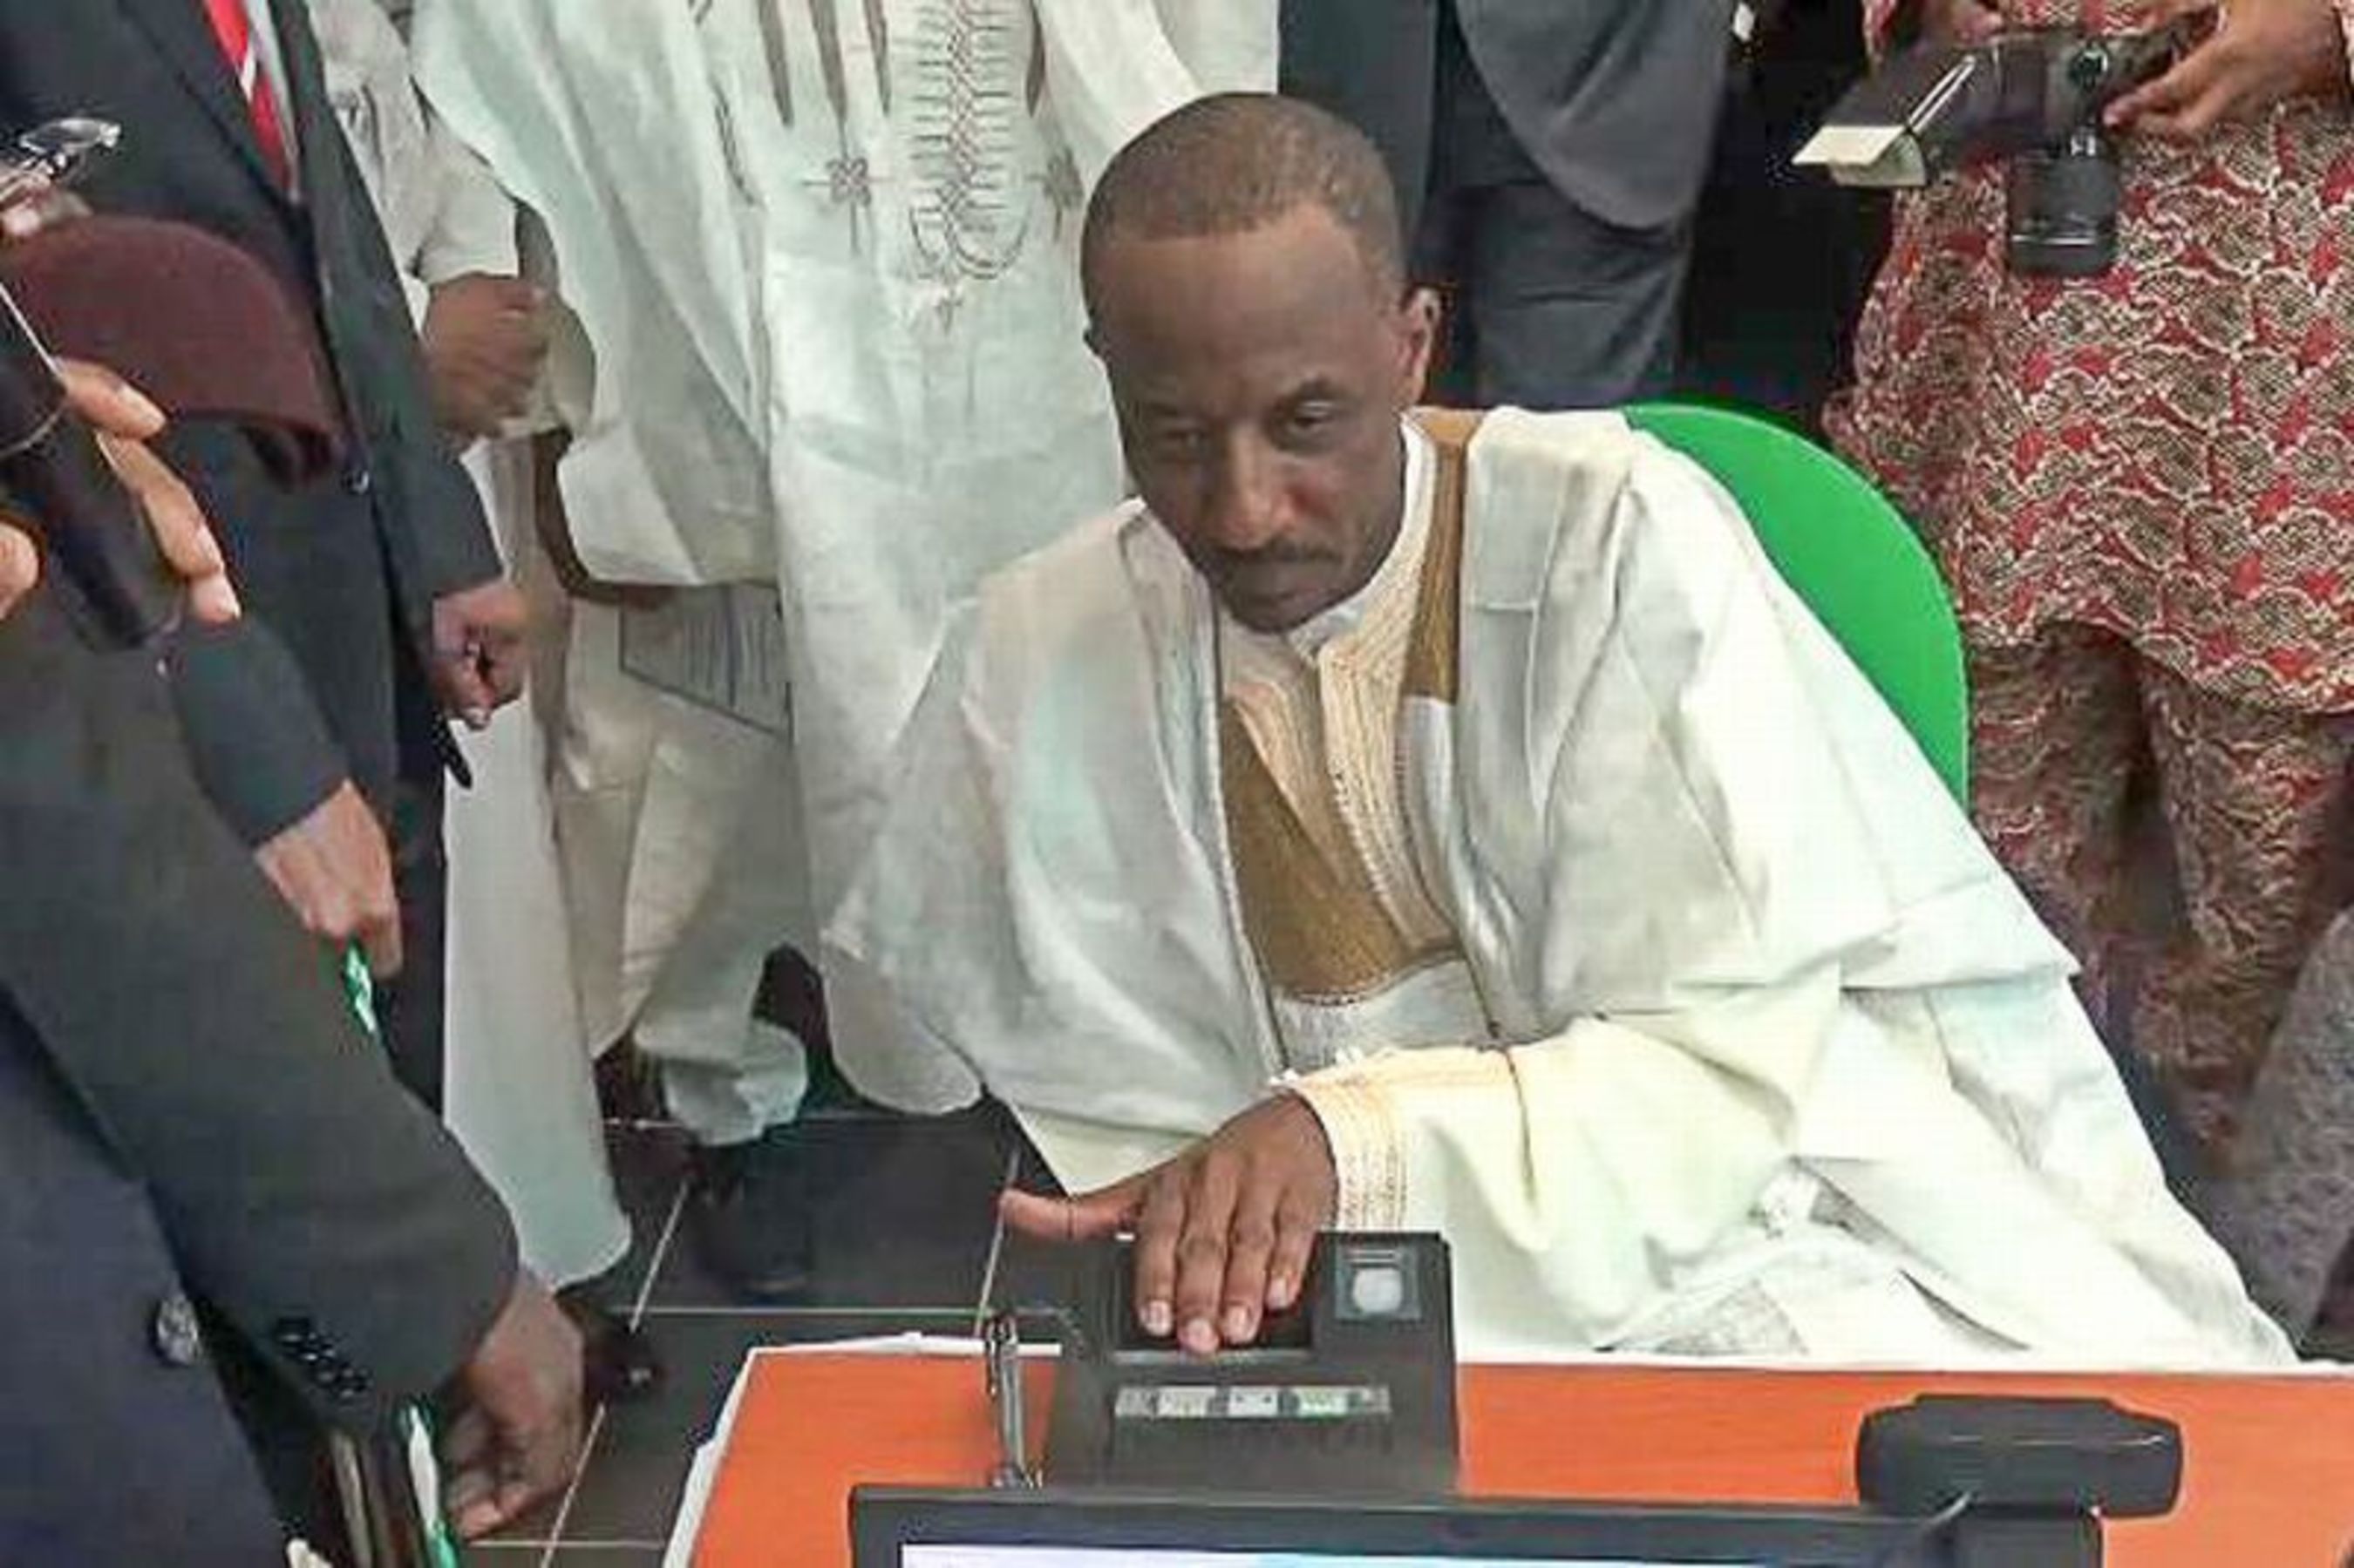 The Governor of the Central Bank of Nigeria, Dr Sanusi Lamido Sanusi, was the first bank customer to register his fingerprint in DERMALOG's biometric system. (PRNewsFoto/DERMALOG Identification Systems)